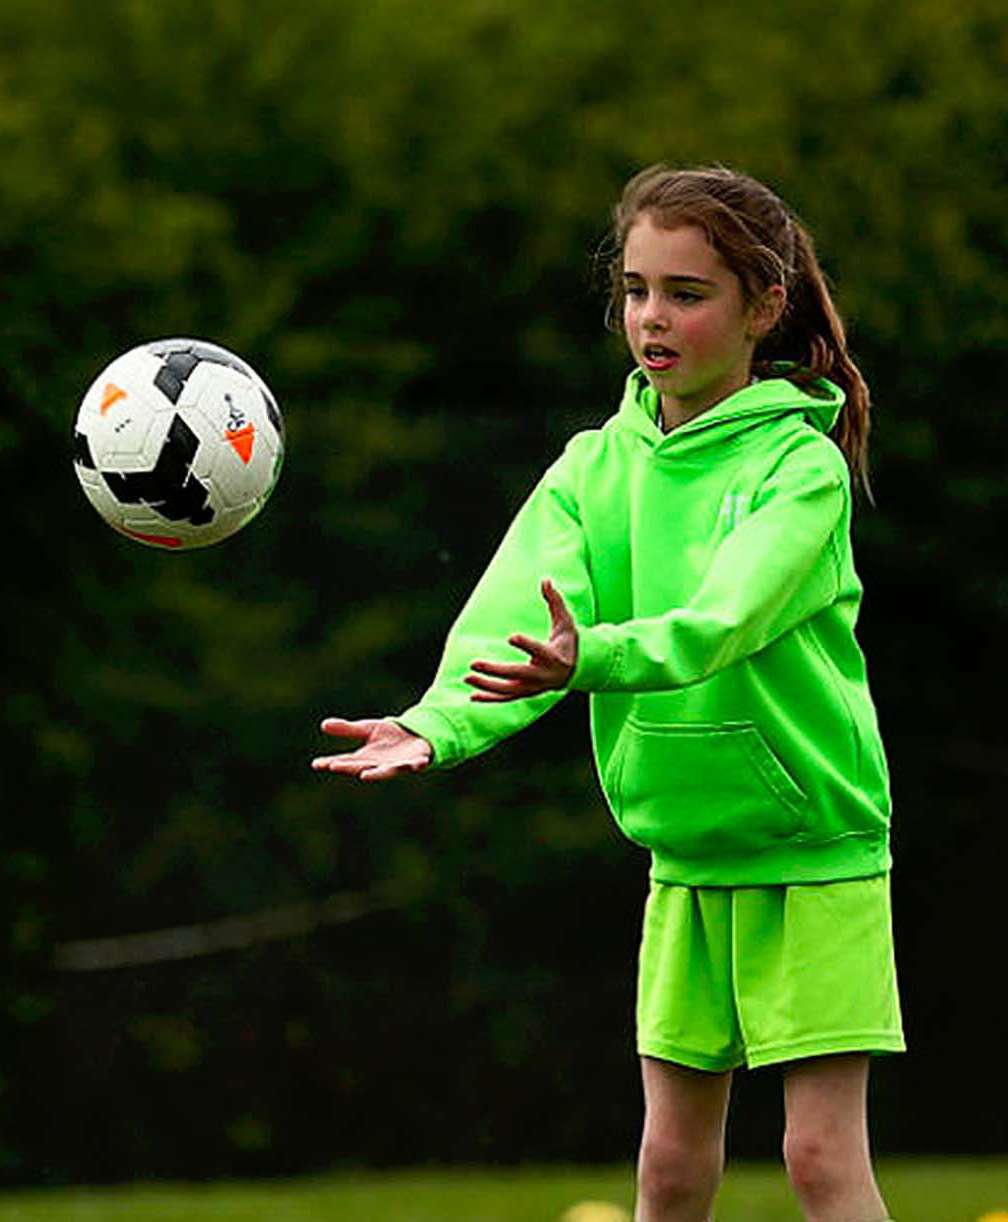 3 young girls wearing green hoodies and shorts throw a football to each other.